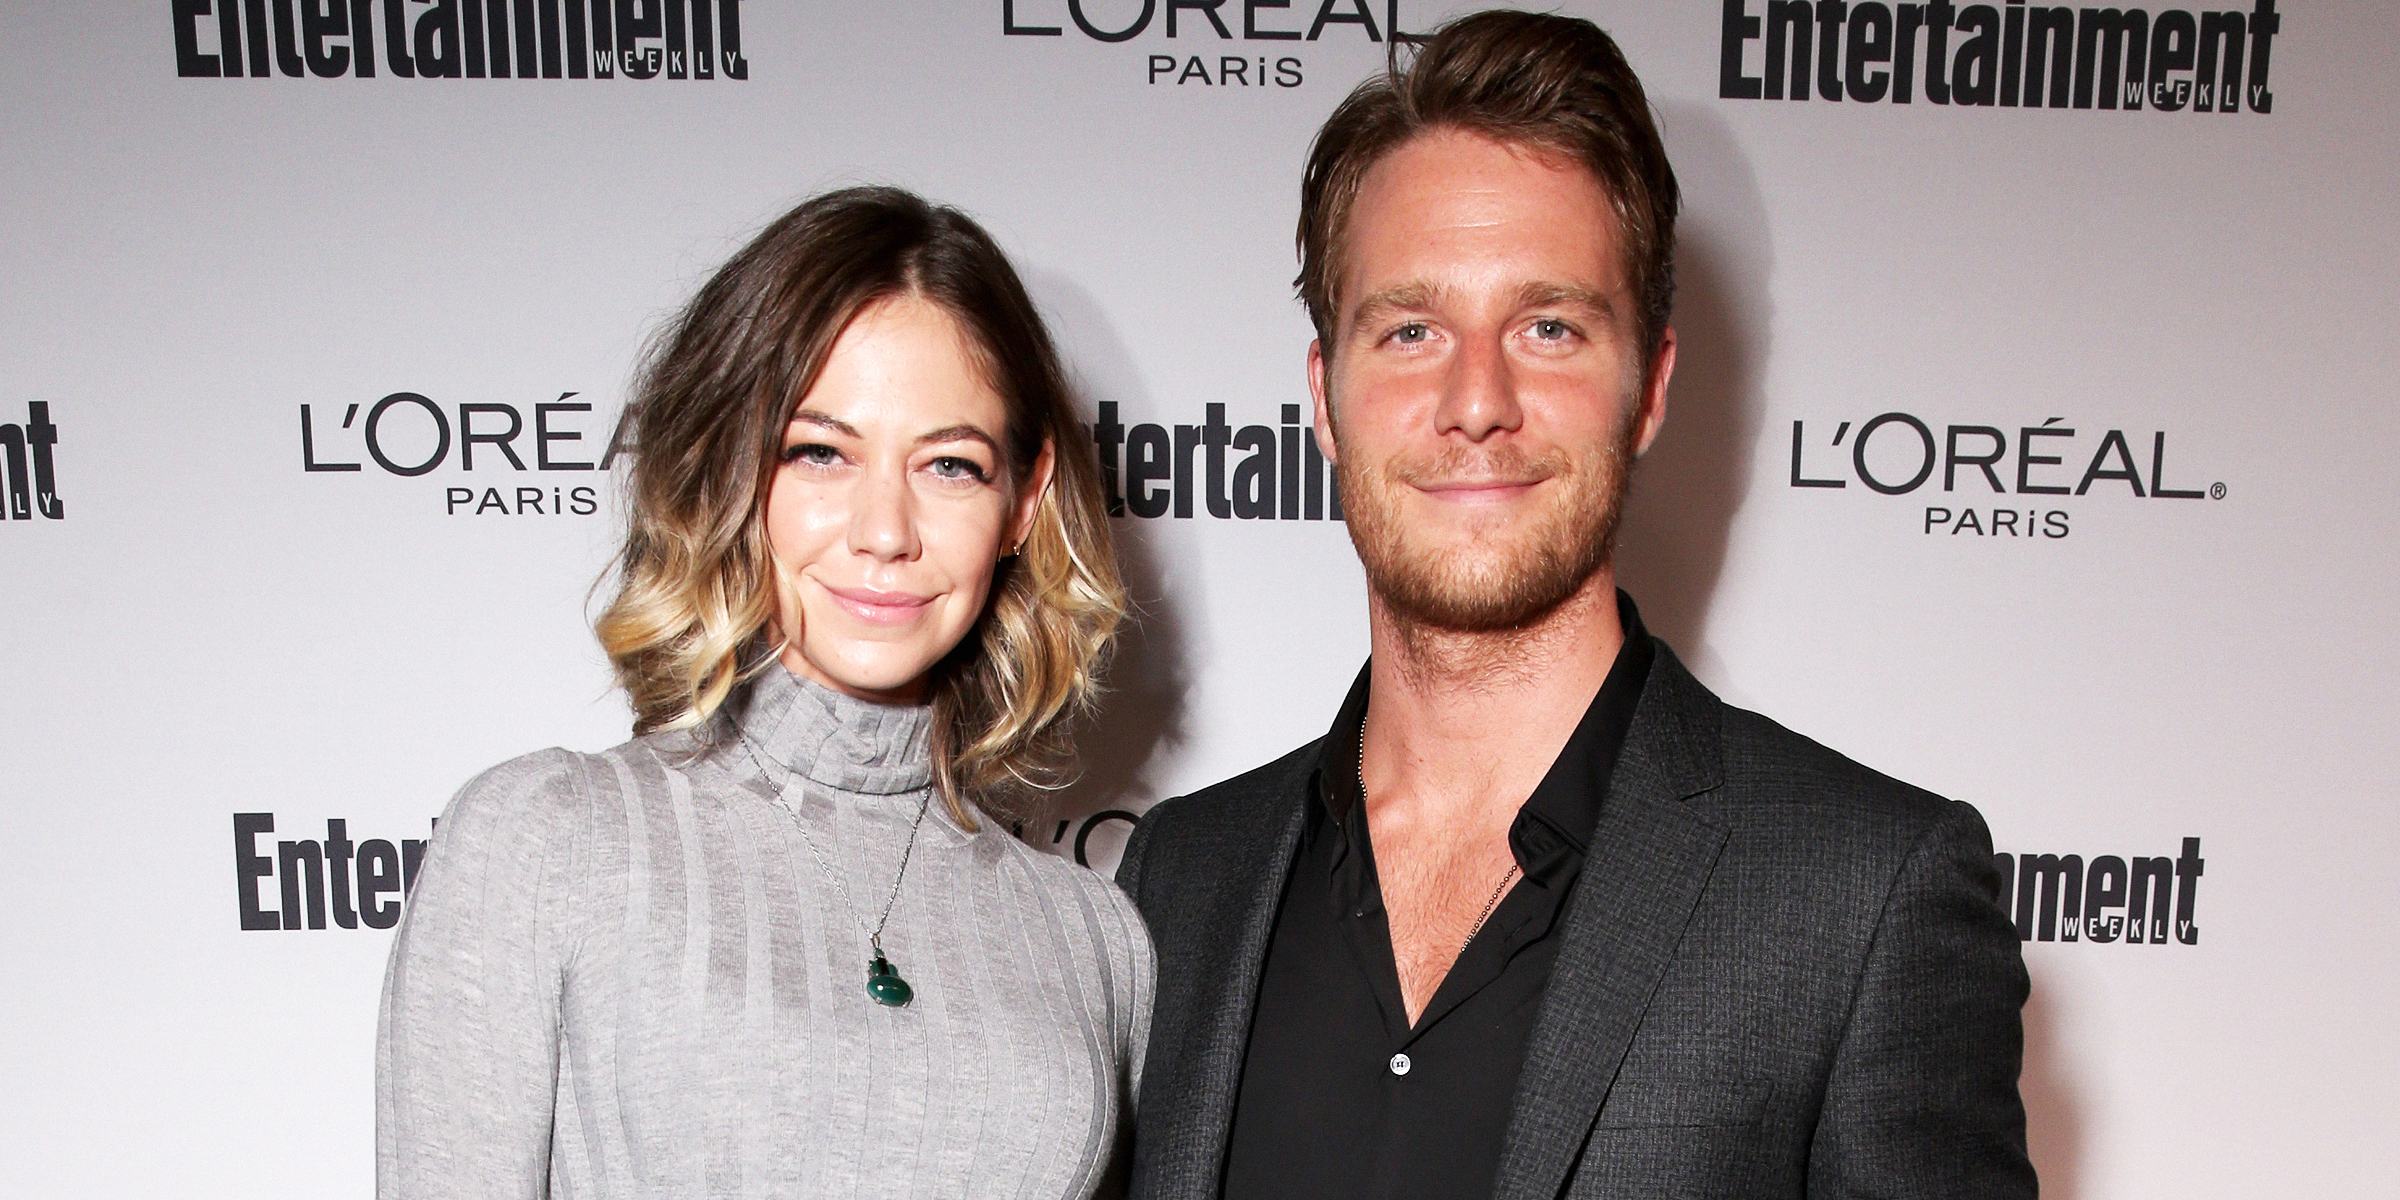 Analeigh Tipton and Jake McDorman. | Source: Getty Images